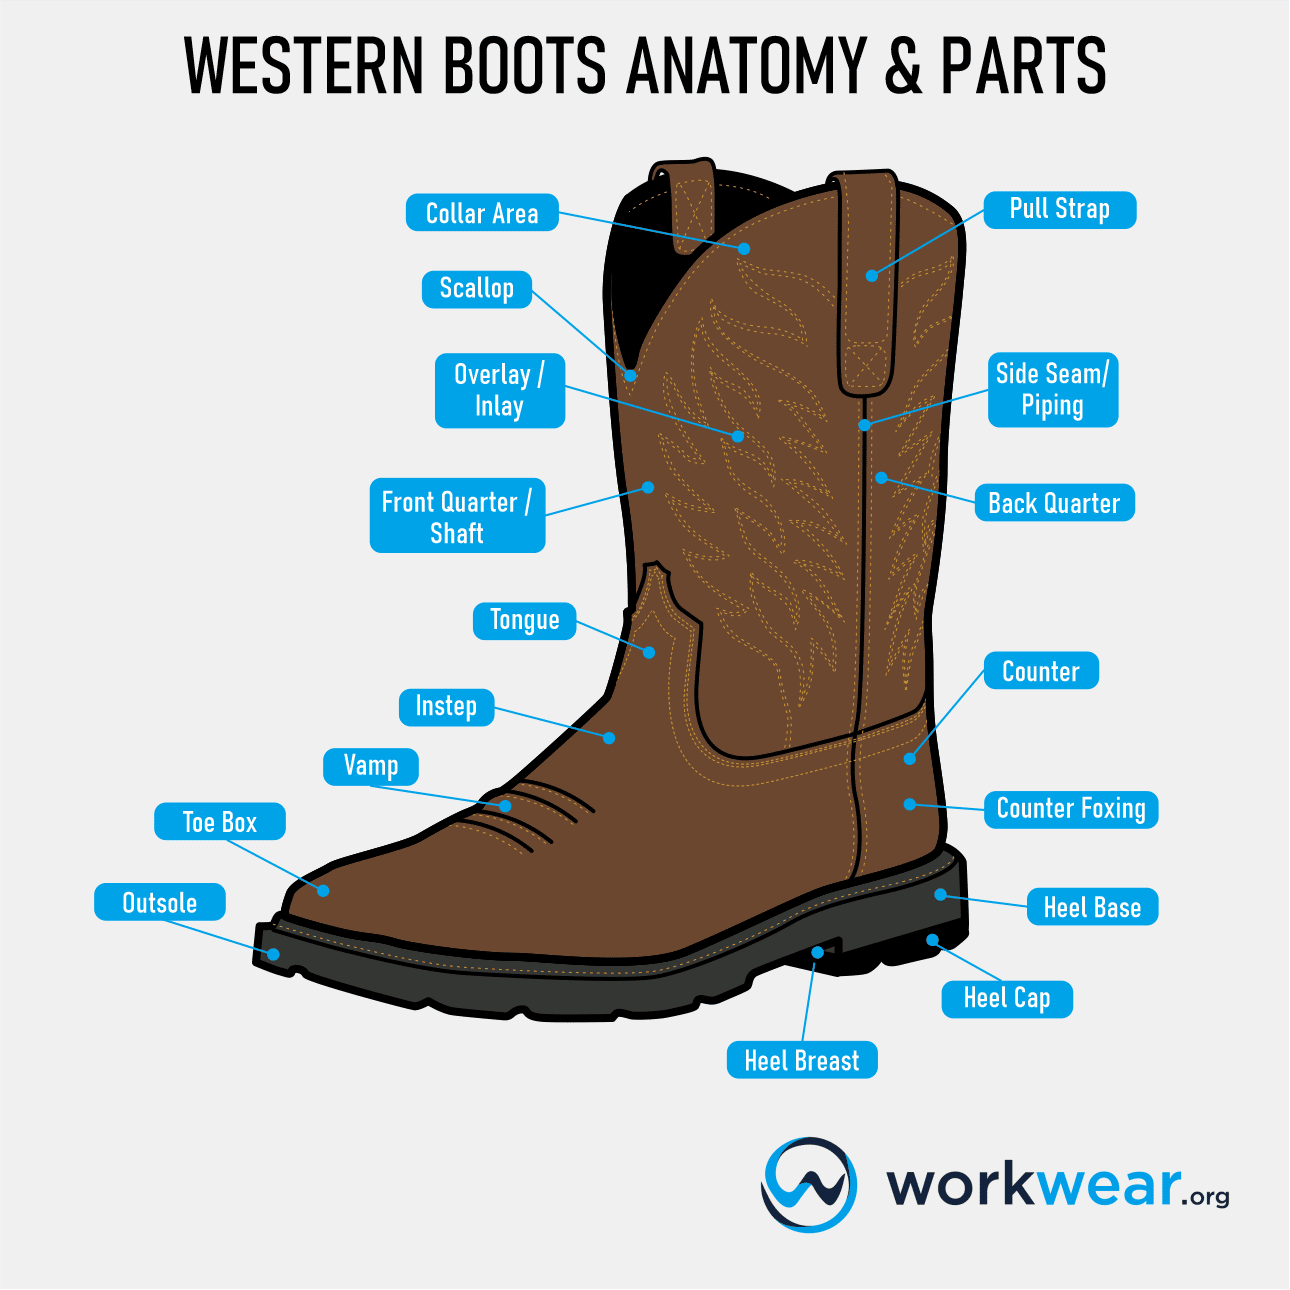 Western Boot Parts Terminology | WorkWear.org